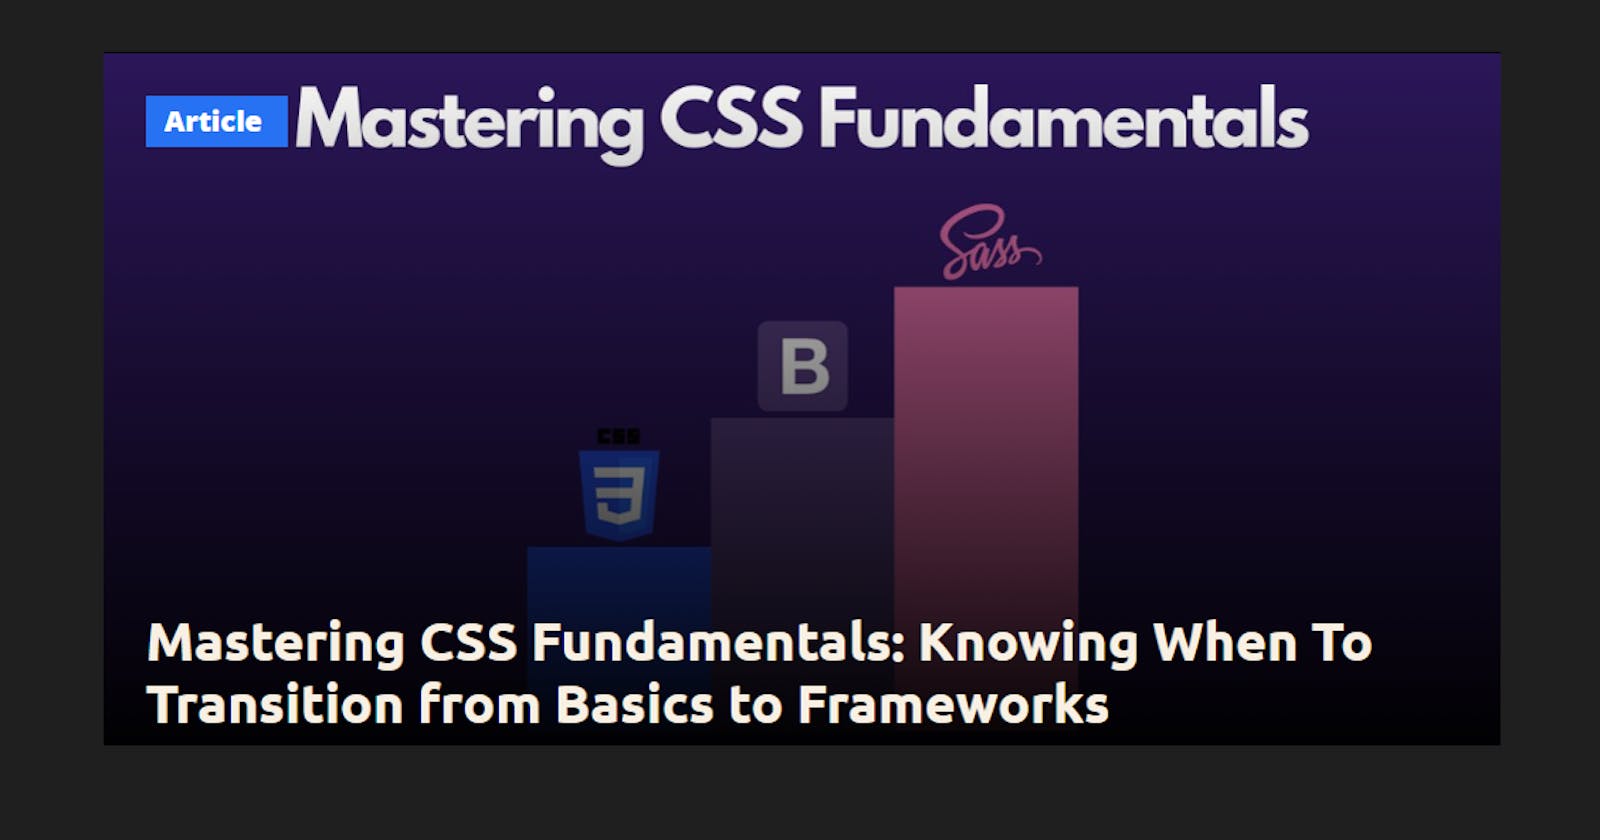 Mastering CSS Fundamentals: Knowing When To Transition from Basics to Frameworks